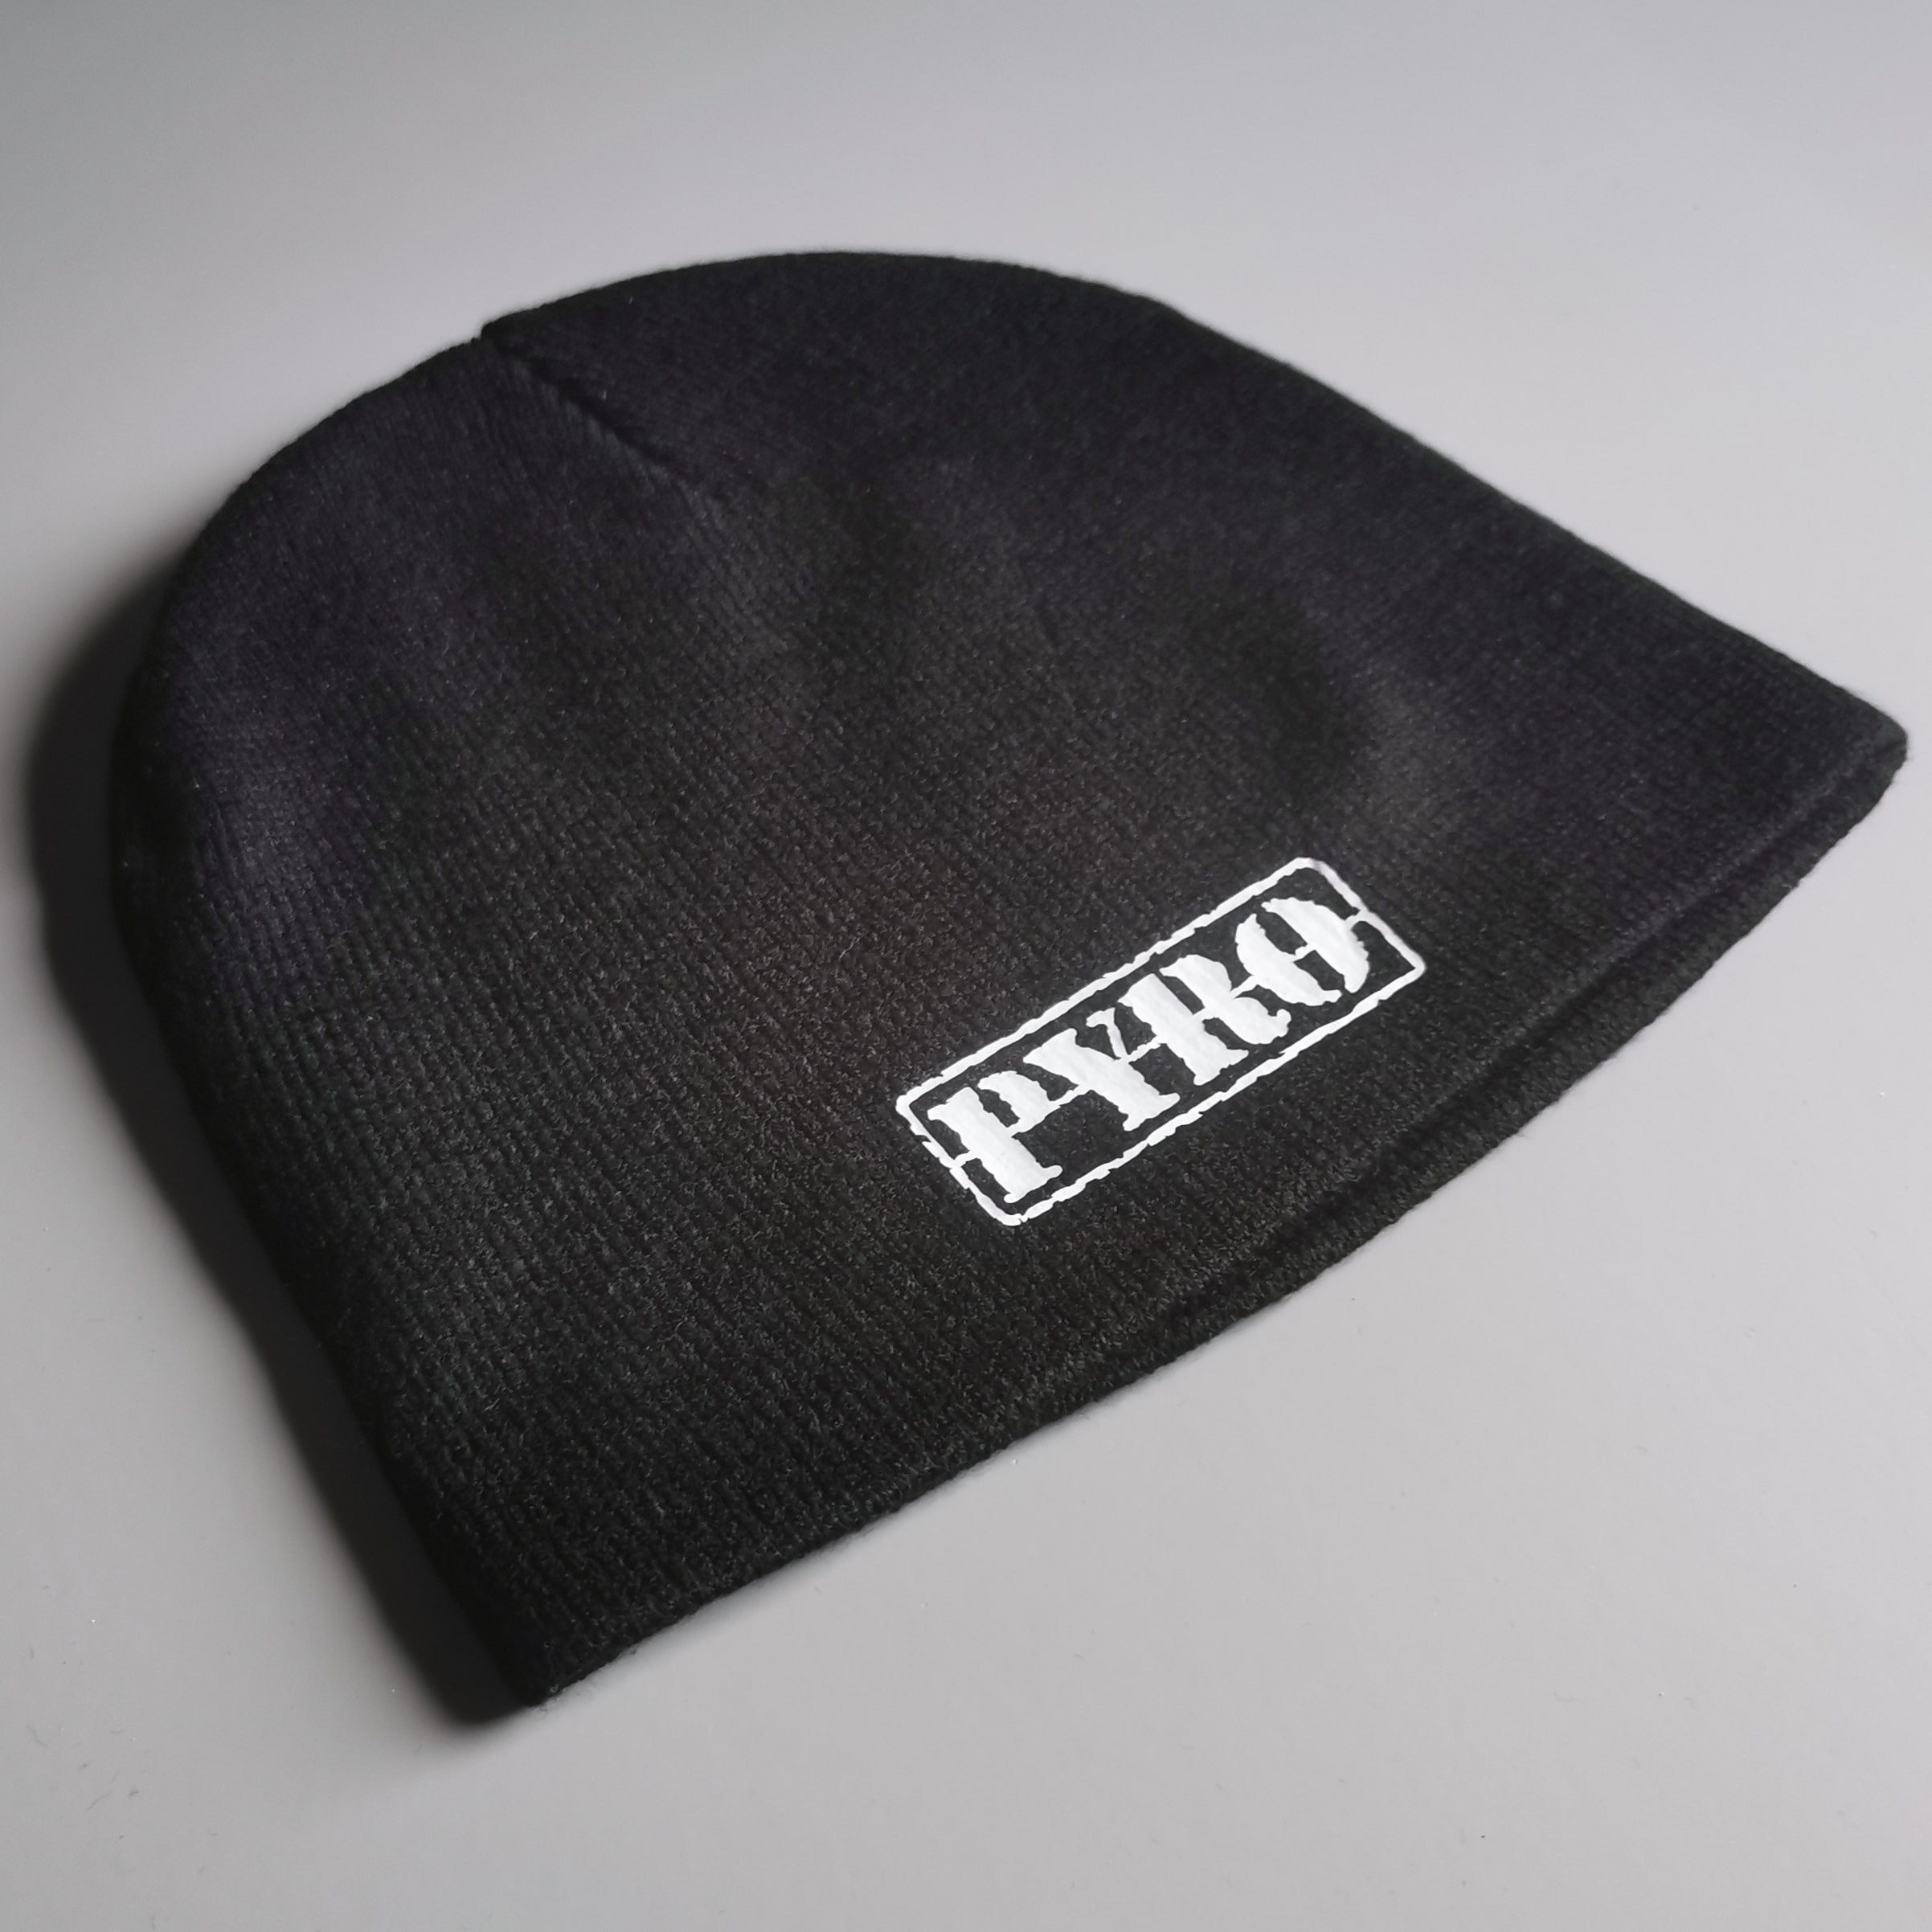 PYRO Beanie (4 color options) - Hat